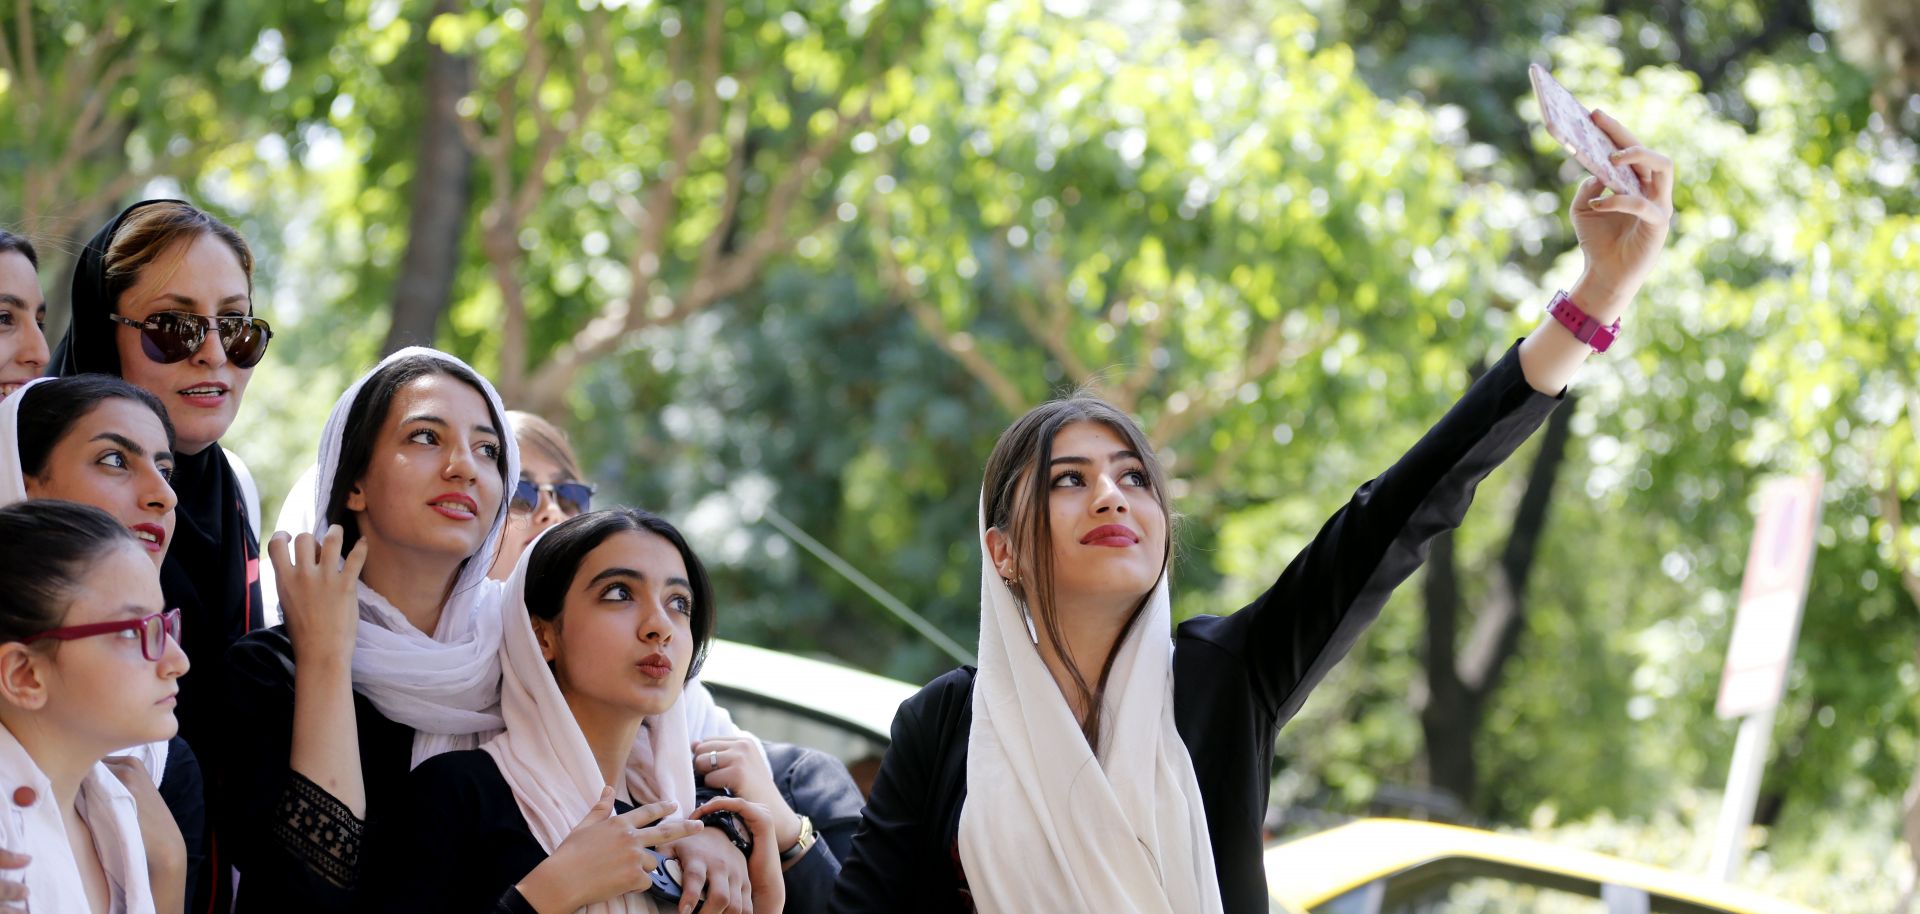 Women pose for a photo while showing their support for Tehran's mayor at a rally in May 2017.